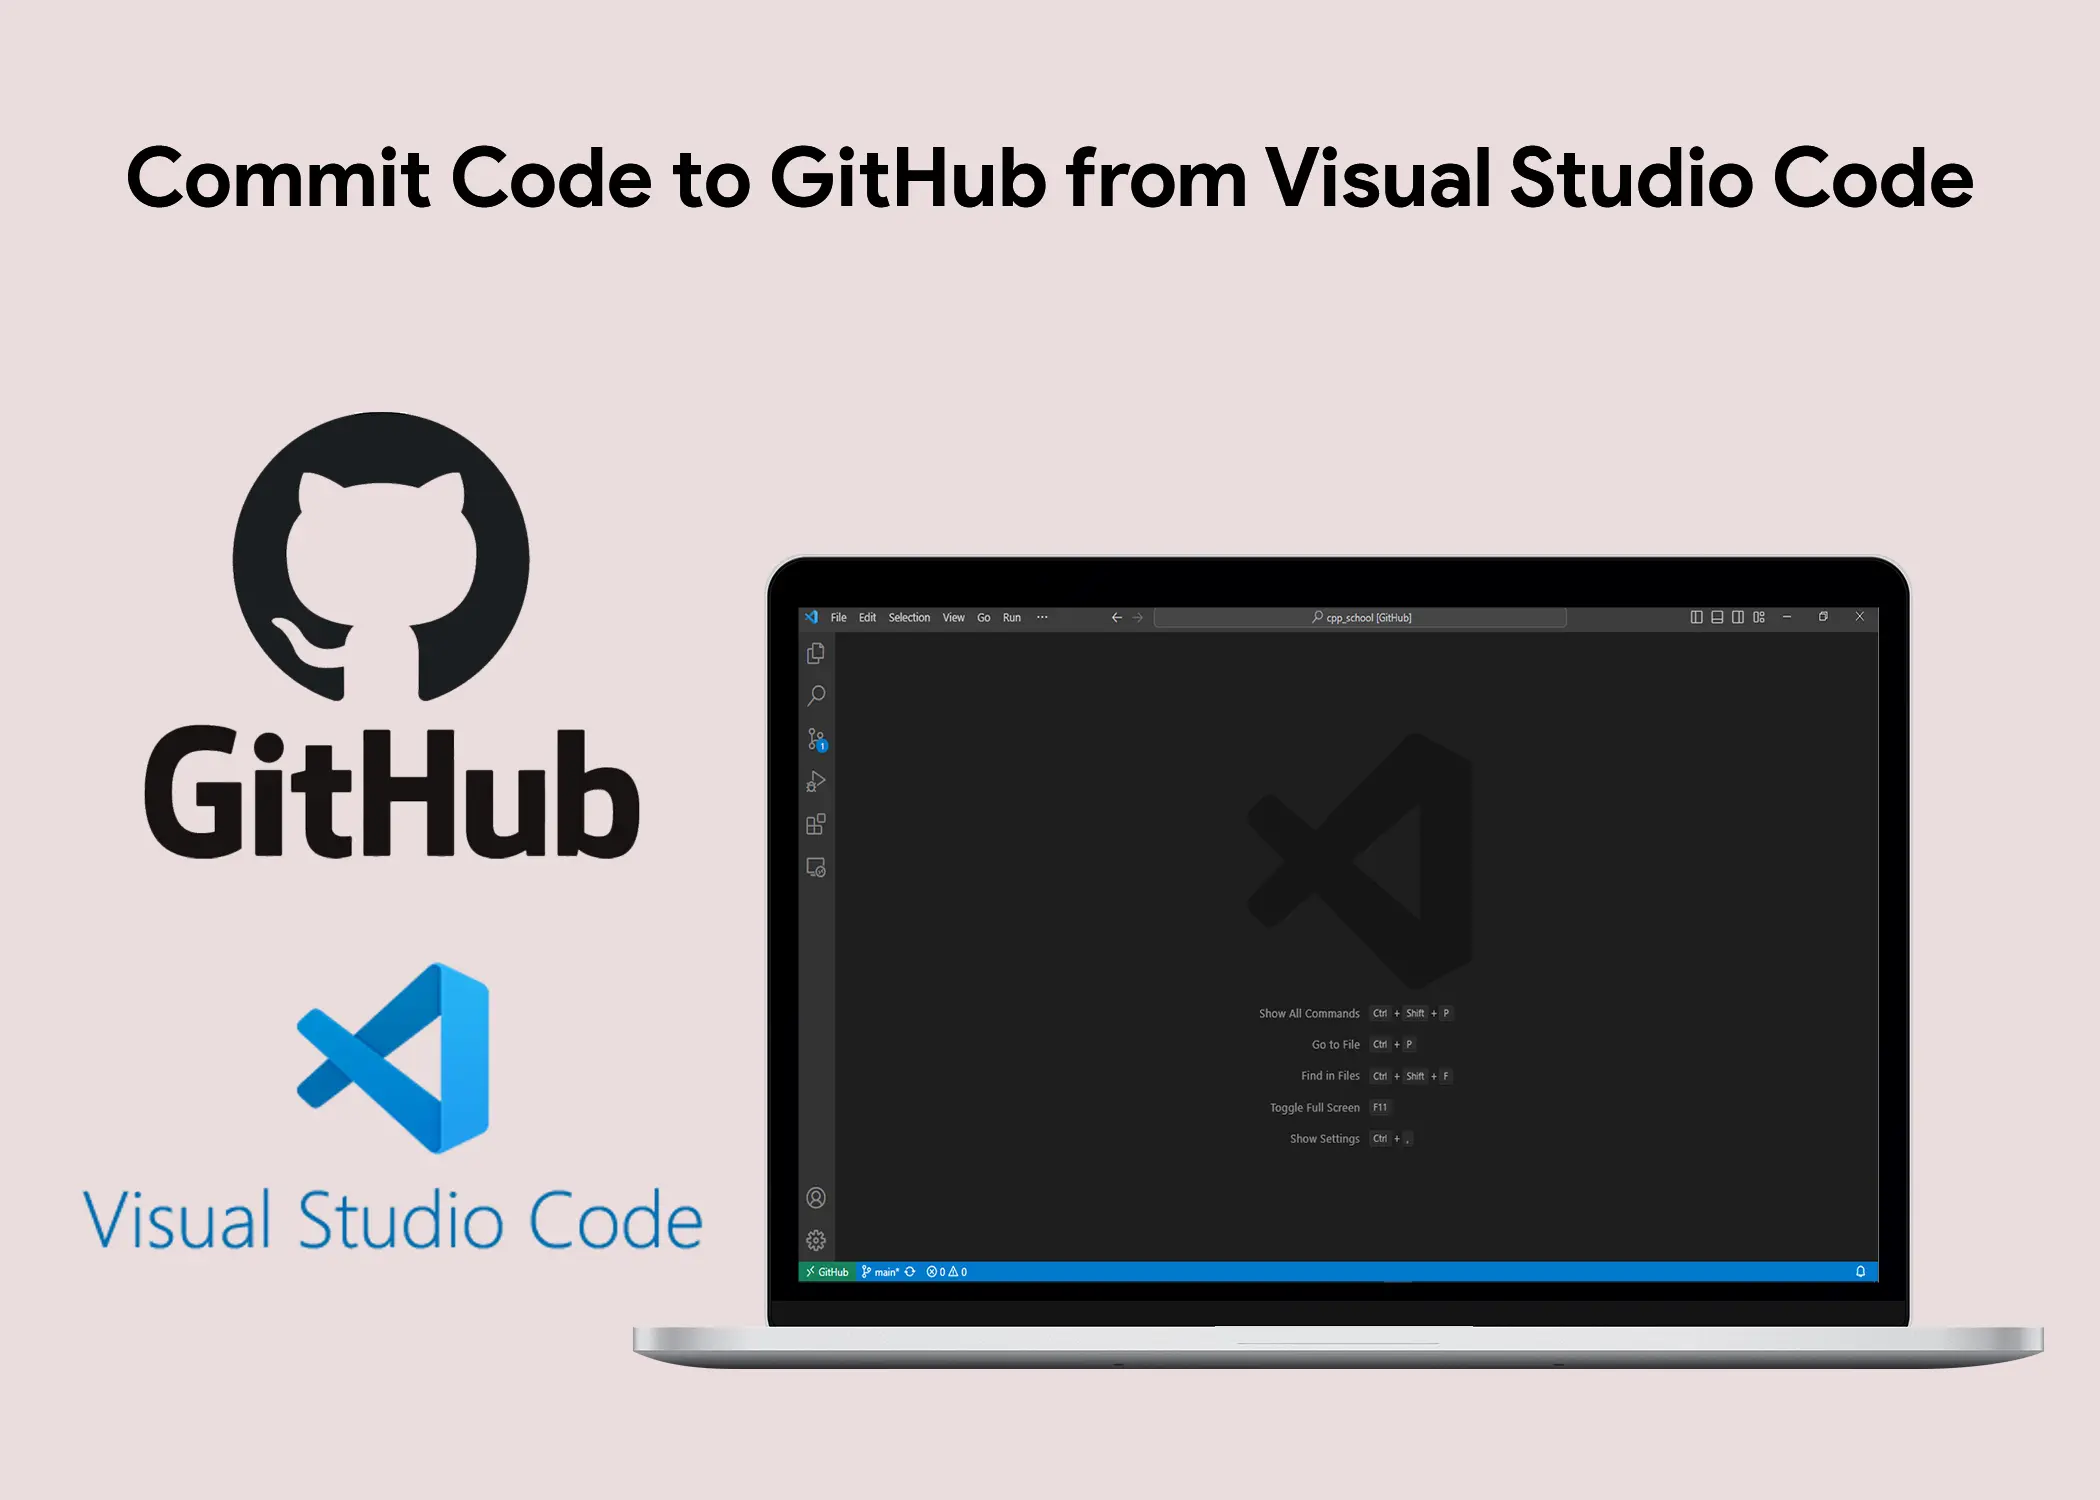 How to Commit Code to GitHub from Visual Studio Code